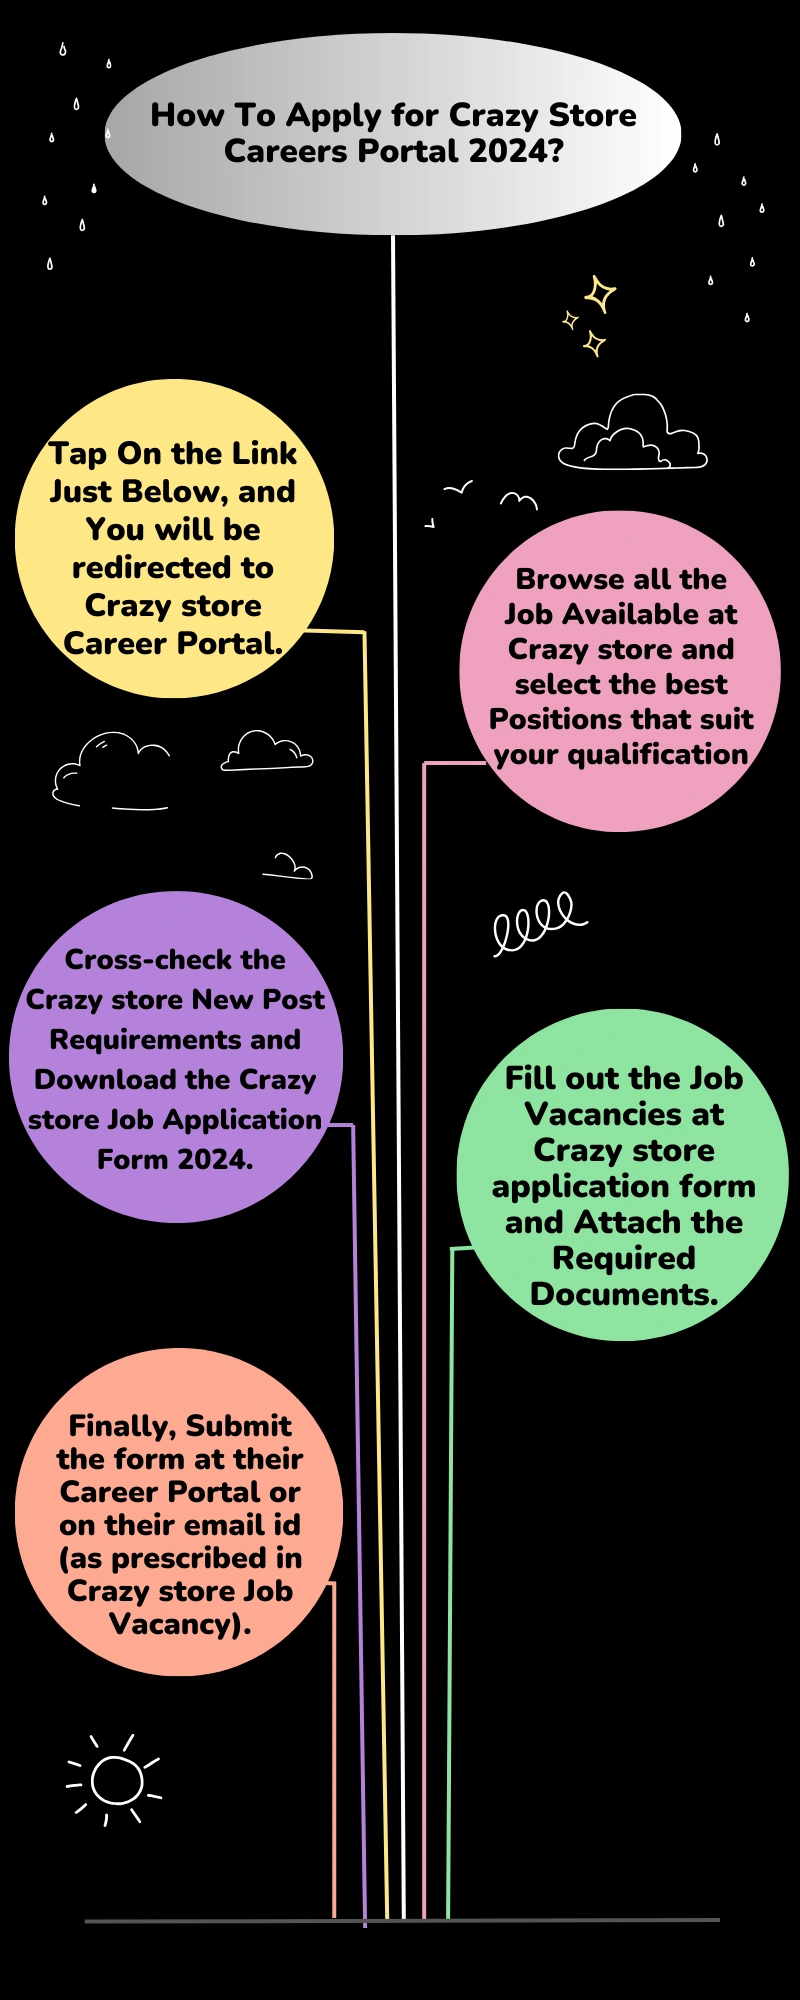 Finally, Submit the form at their Career Portal or on their email id (as prescribed in Crazy store Job Vacancy).